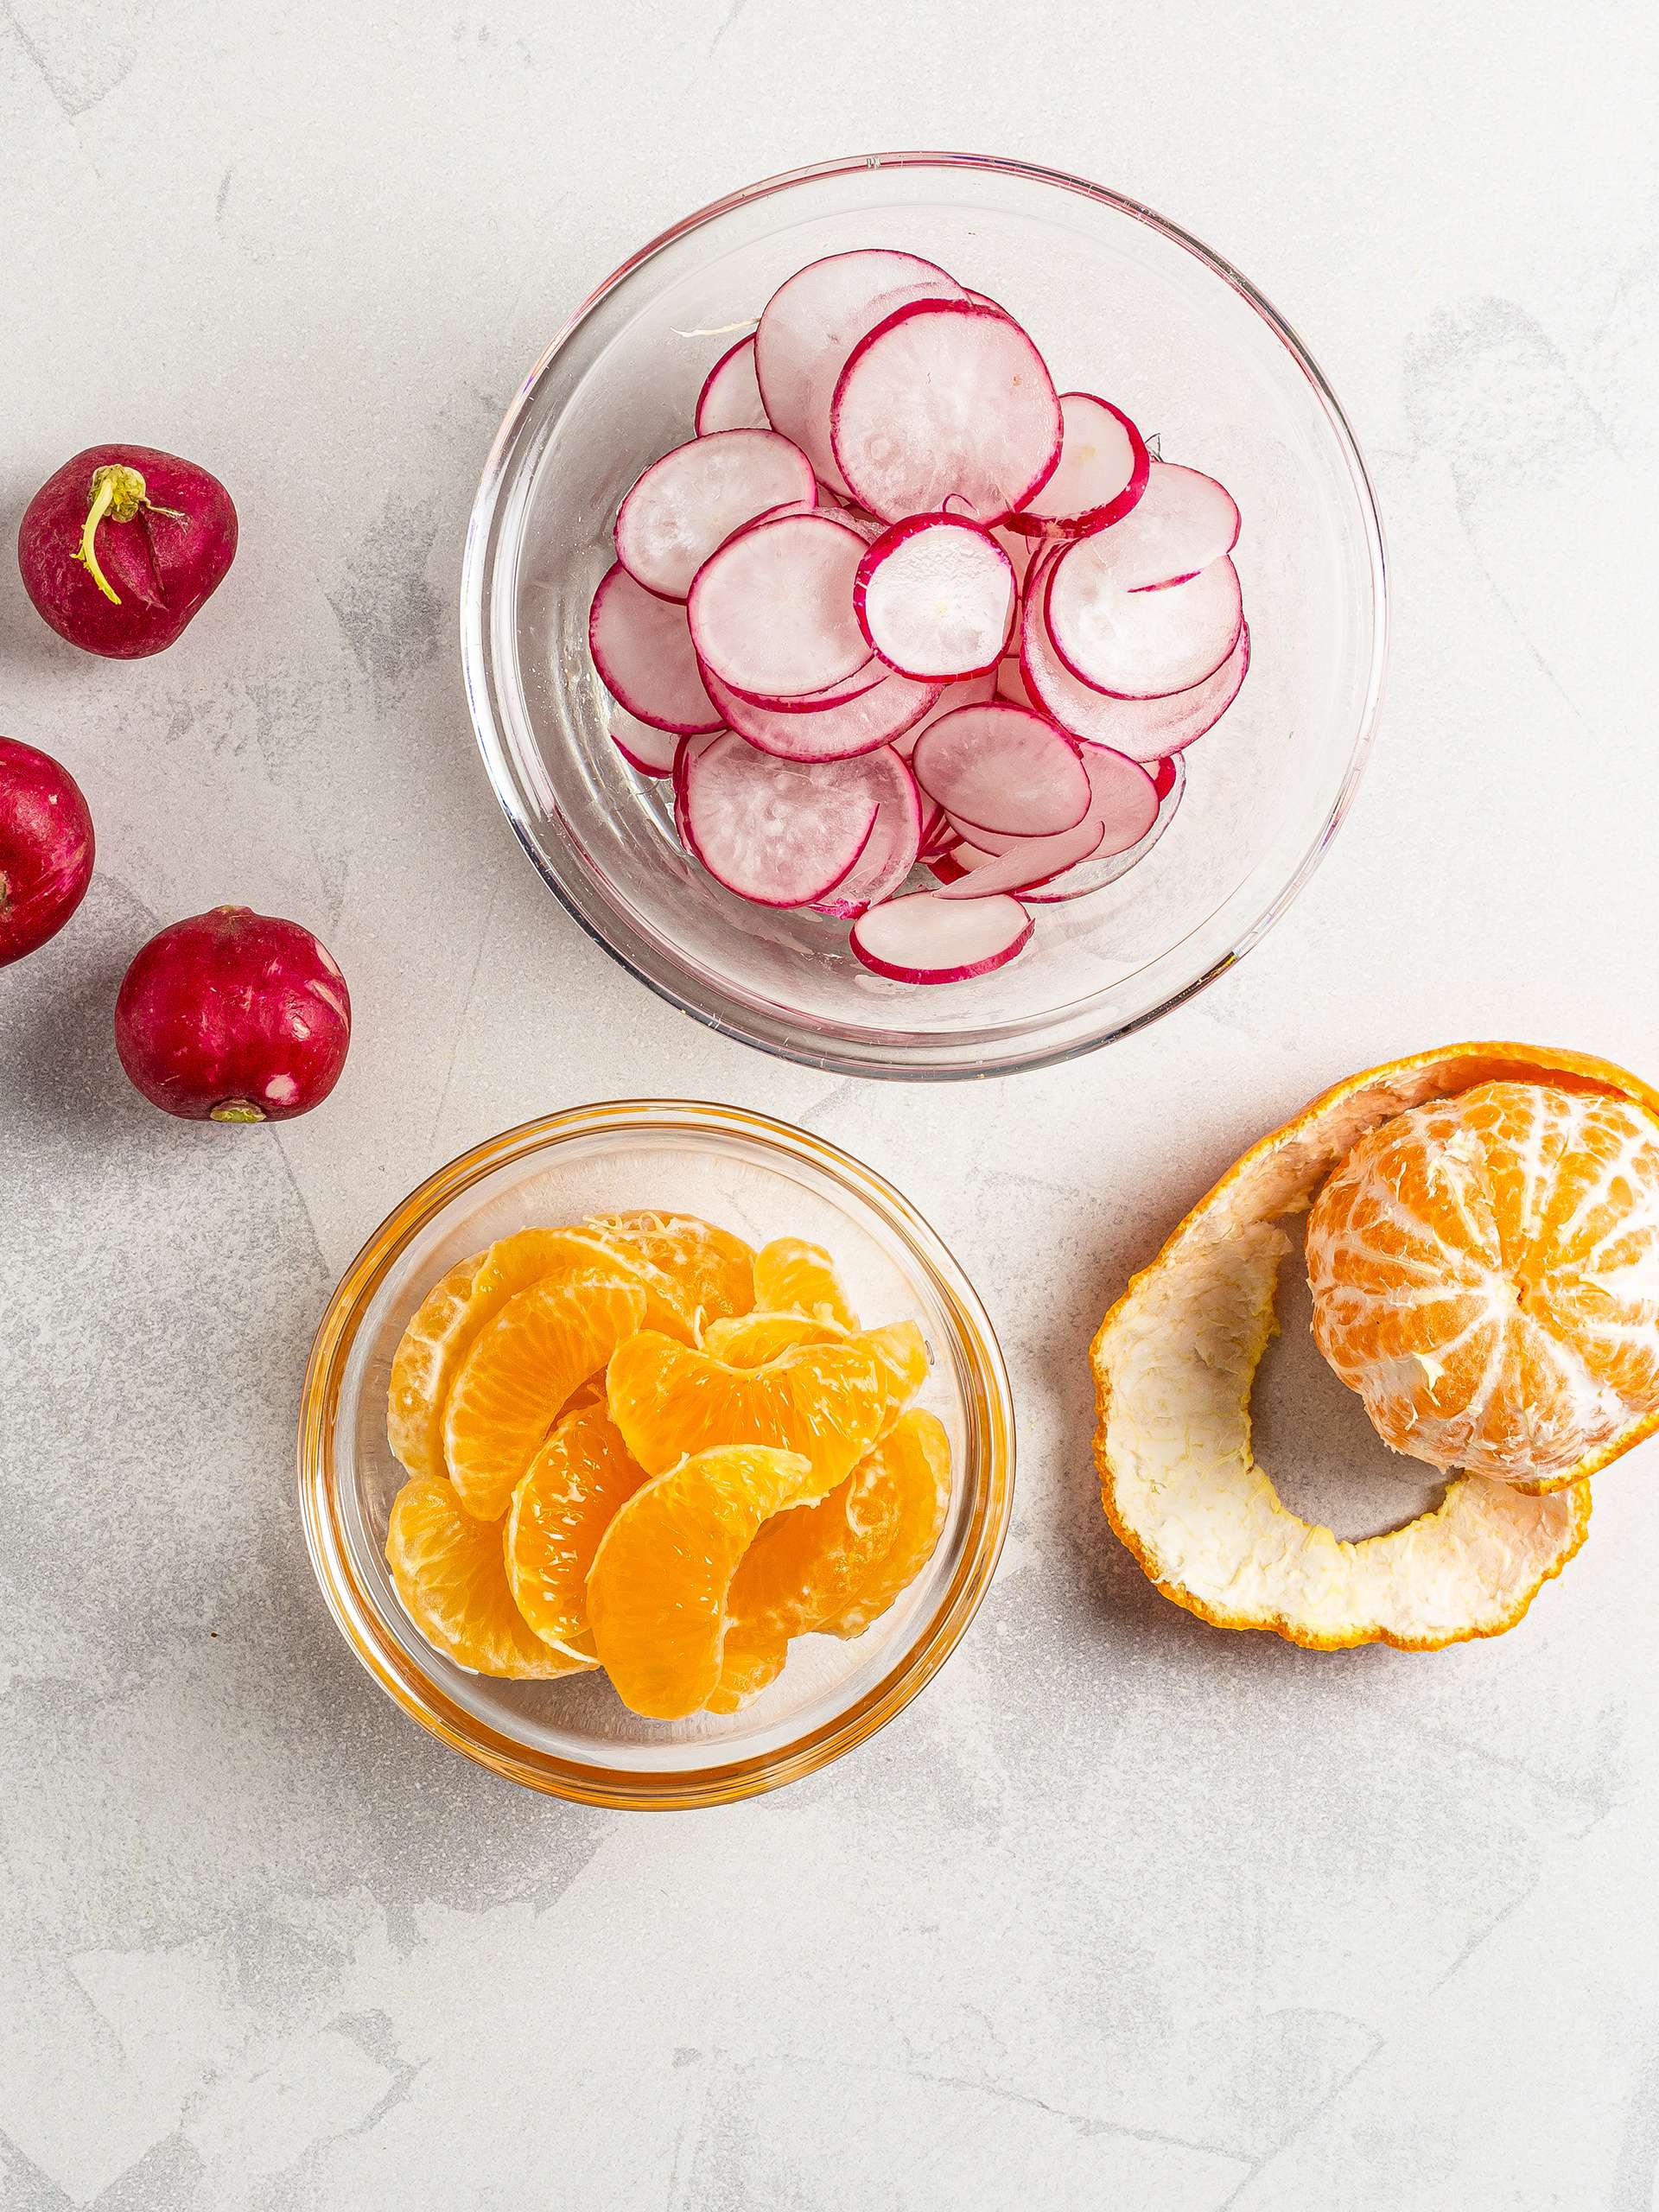 Sliced radishes and tangerines